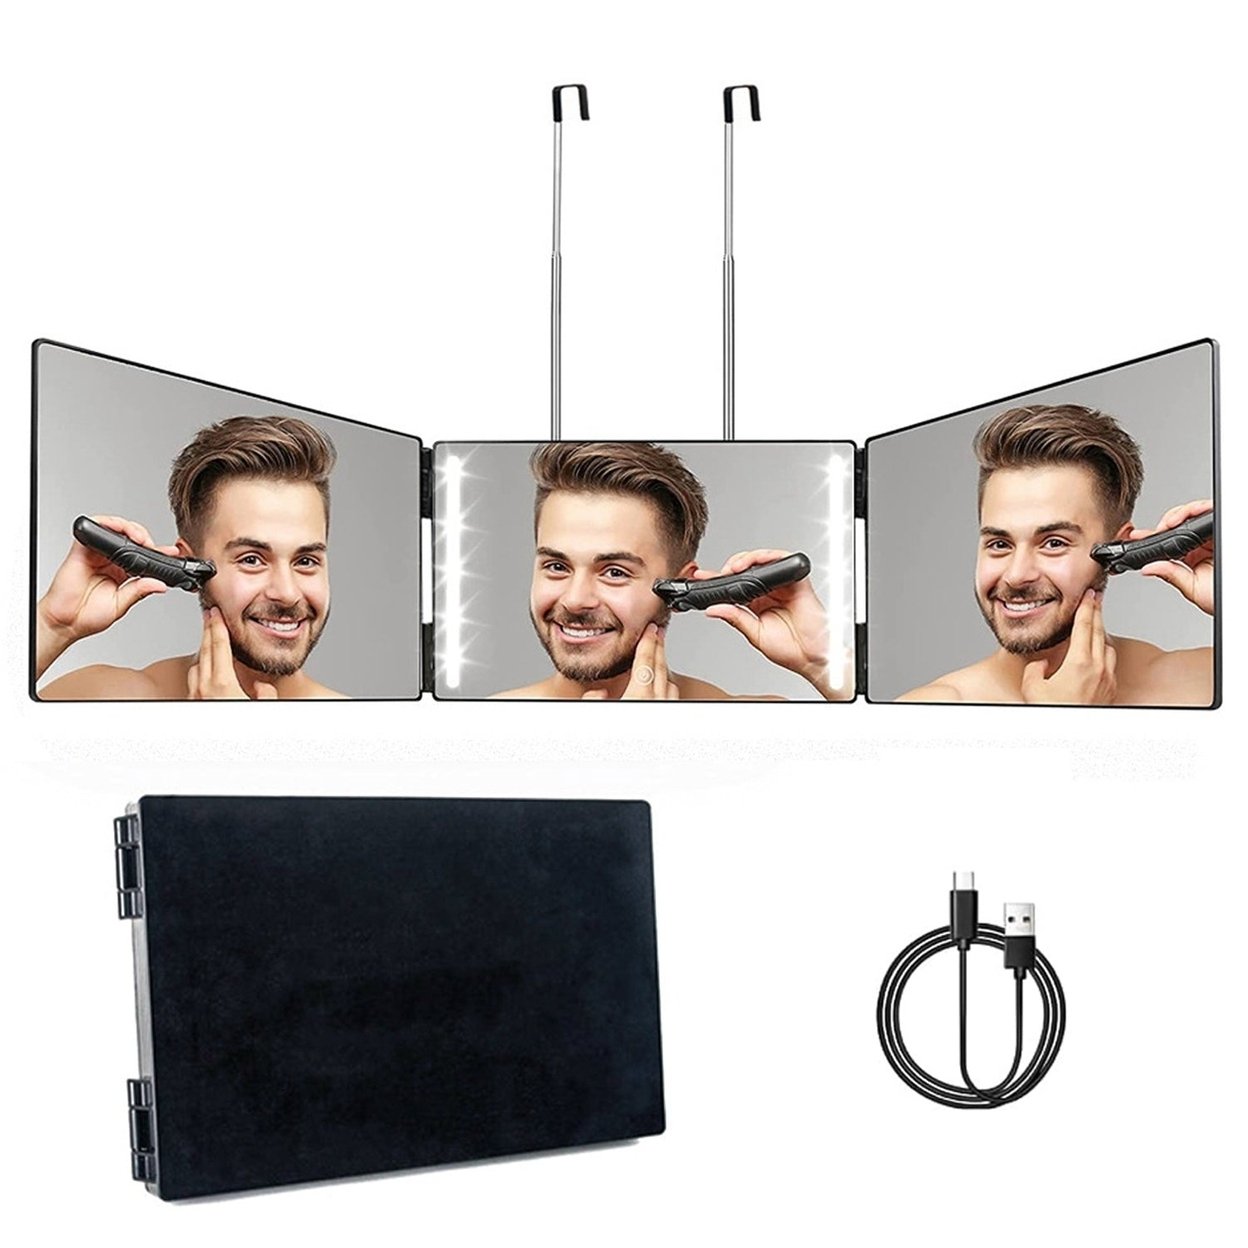 SKUSHOPS 3 Way Mirror with LED Telescopic Hanger Tri fold Mirror Personal Makeup Mirror with Micro USB Cable for Self Shaving Hair